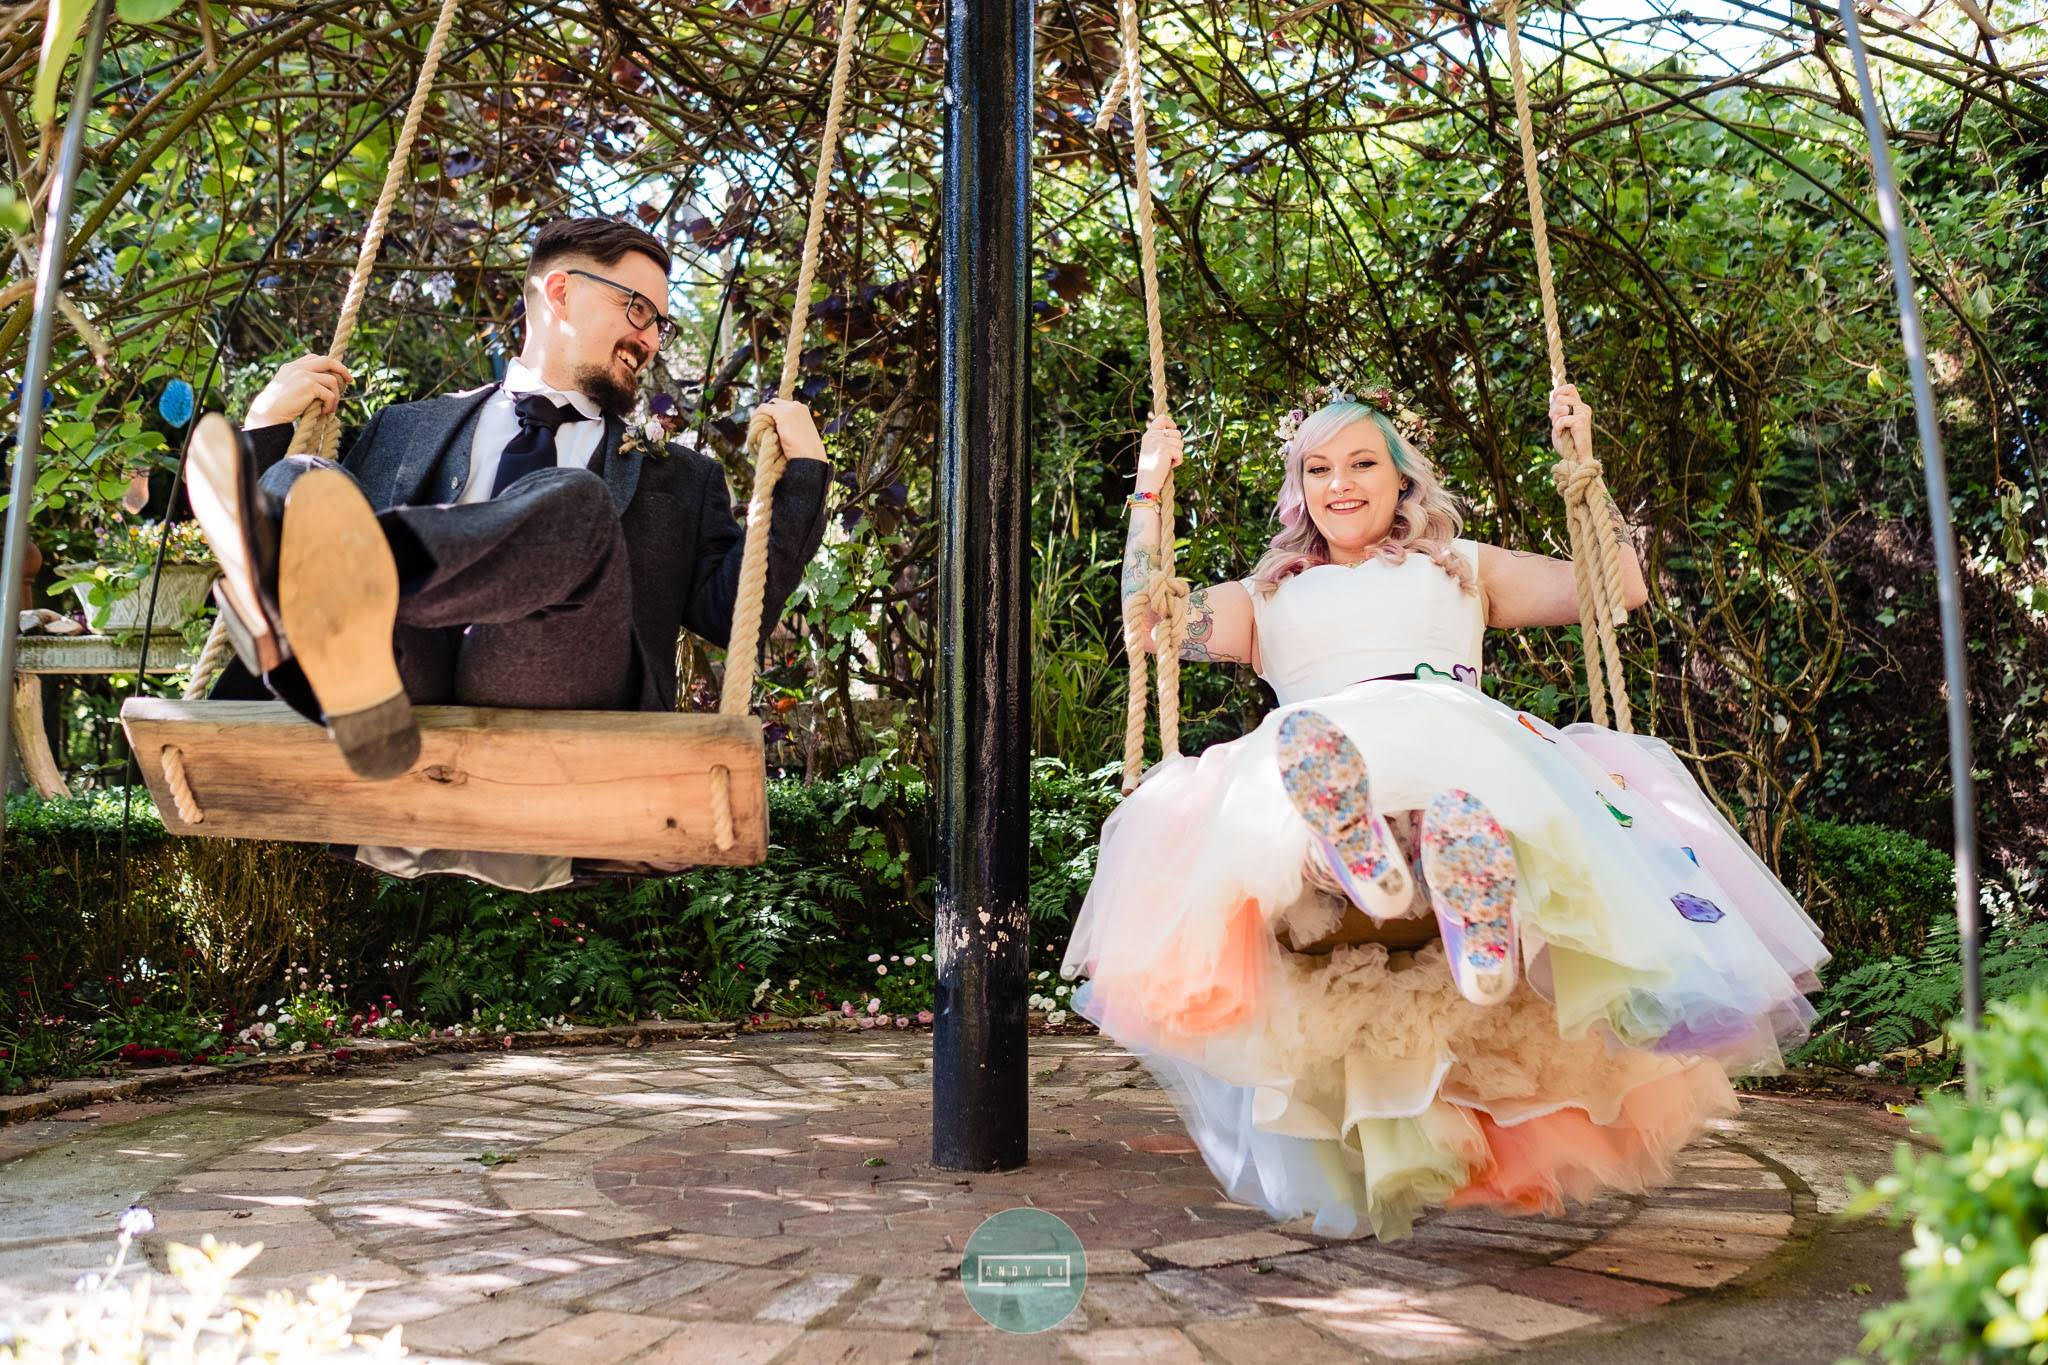 rainbow wedding themed wedding dress by the little wedding shop - colourful wedding inspiration - couple on swings - rainbow tulle layers - bespoke wedding dress inspiration with dice and irregular choice shoes